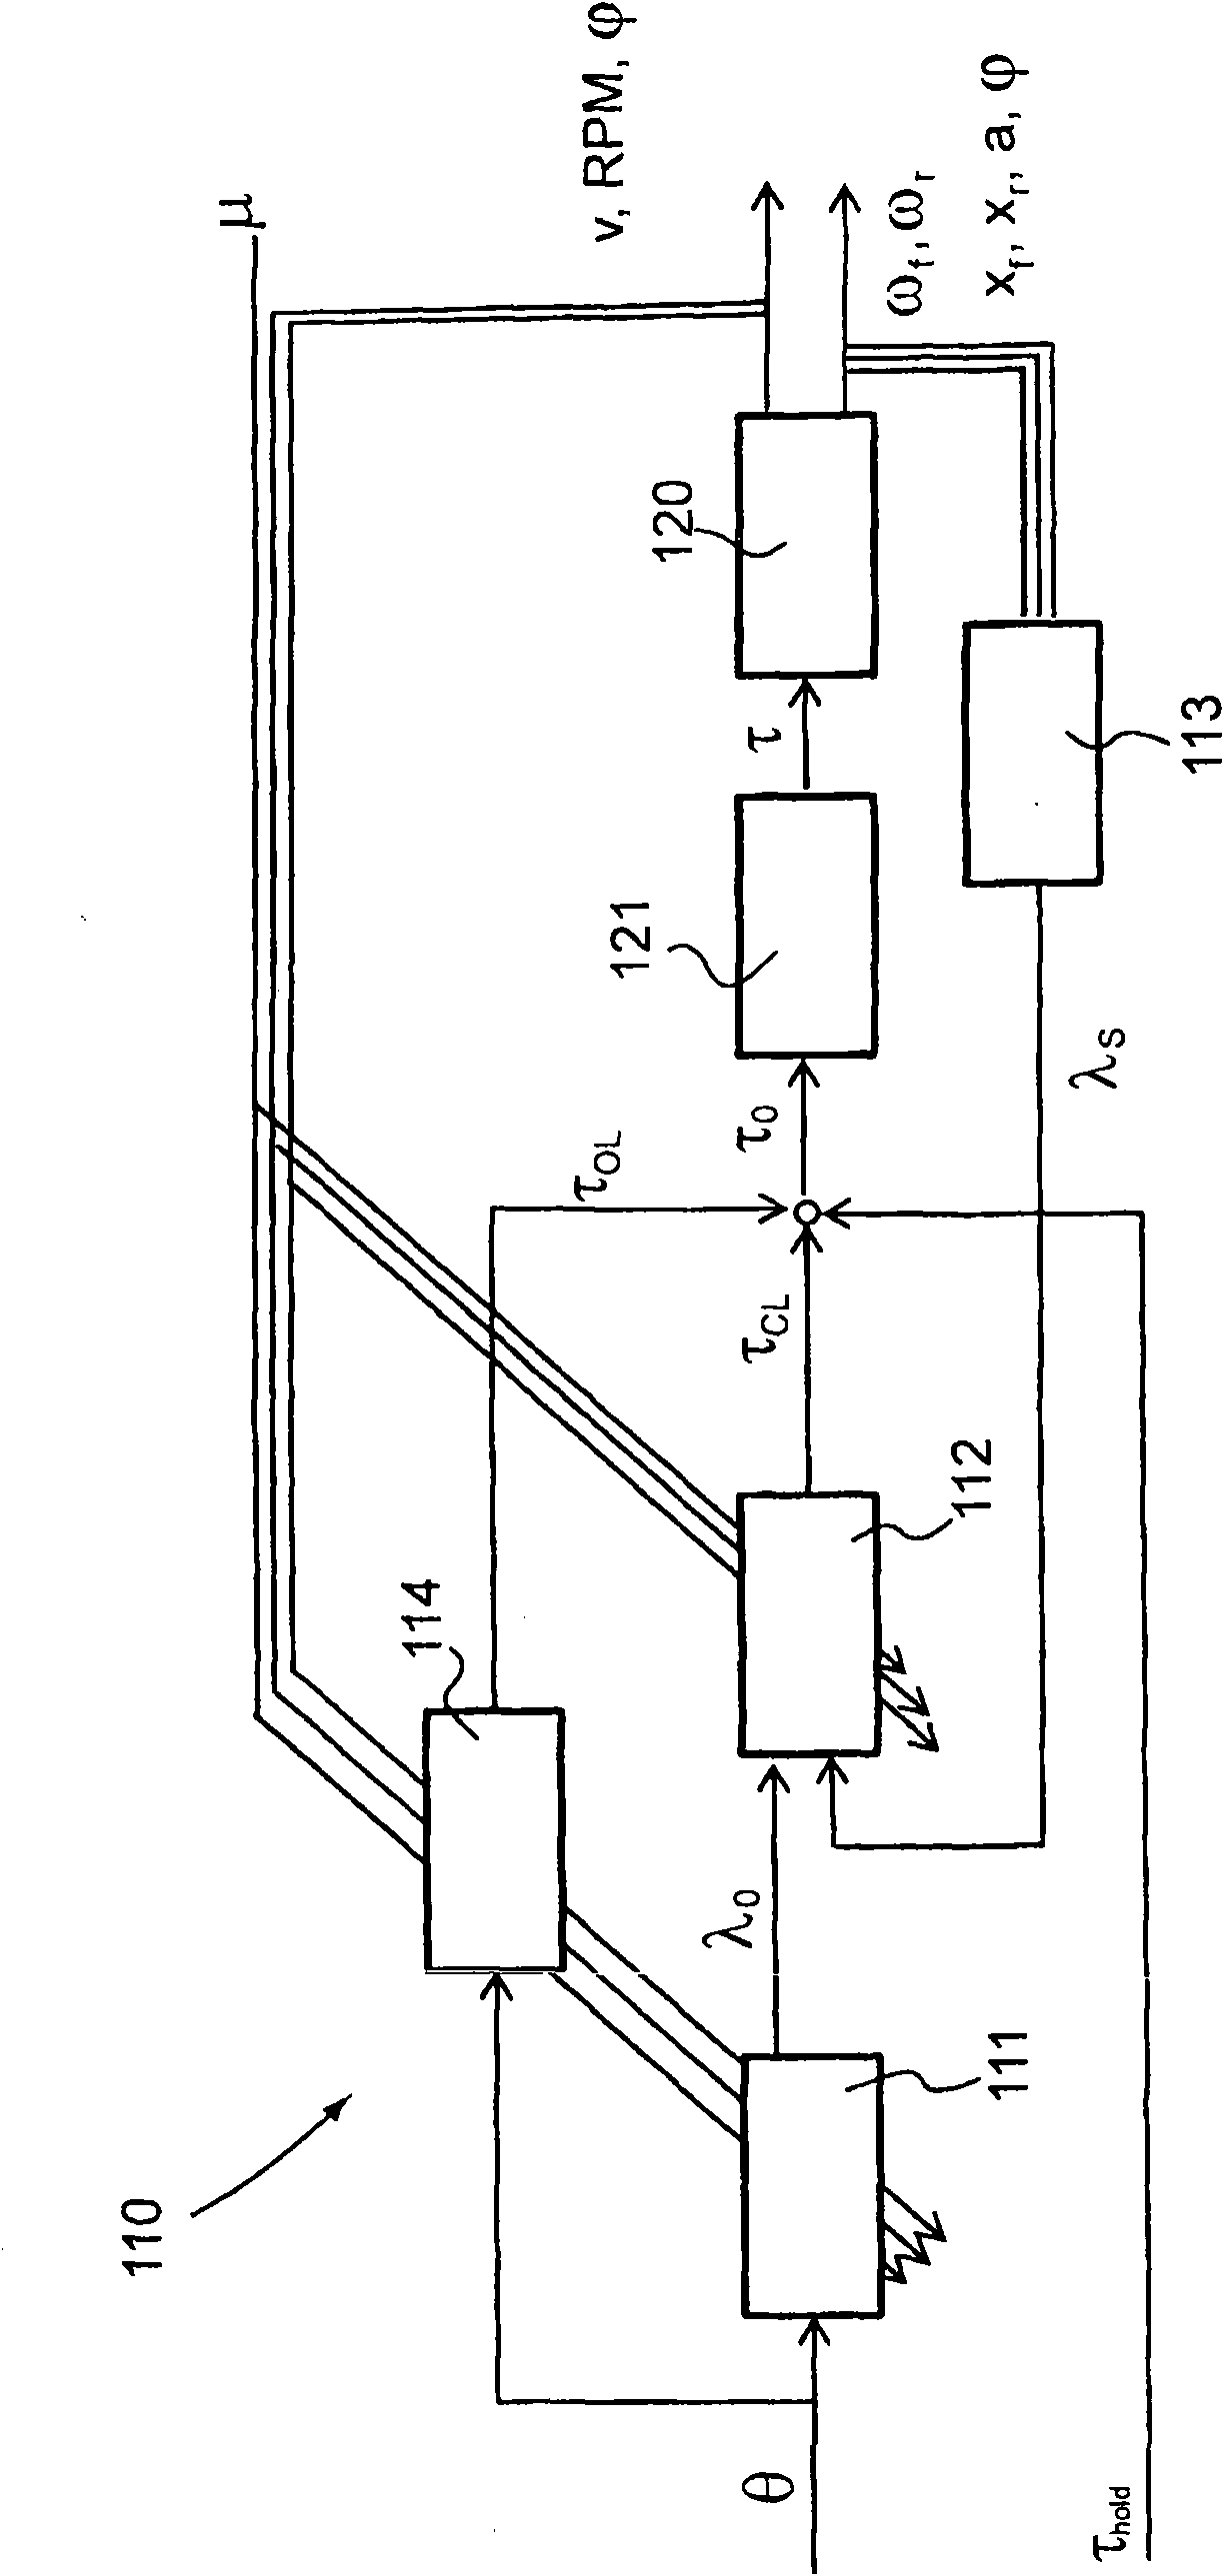 System and method for controlling traction in a two-wheeled vehicle